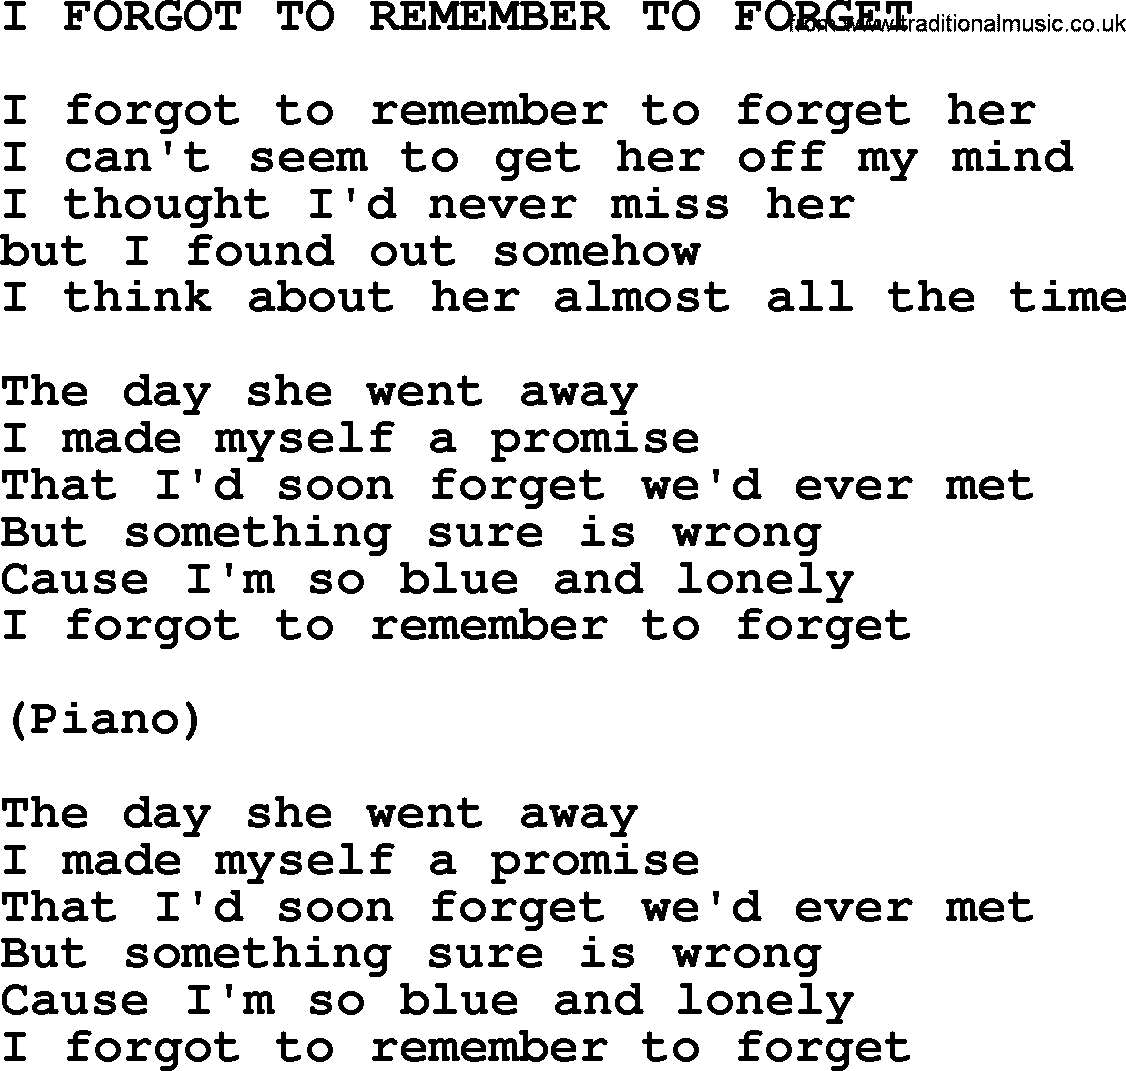 Johnny Cash song I Forgot To Remember To Forget.txt lyrics